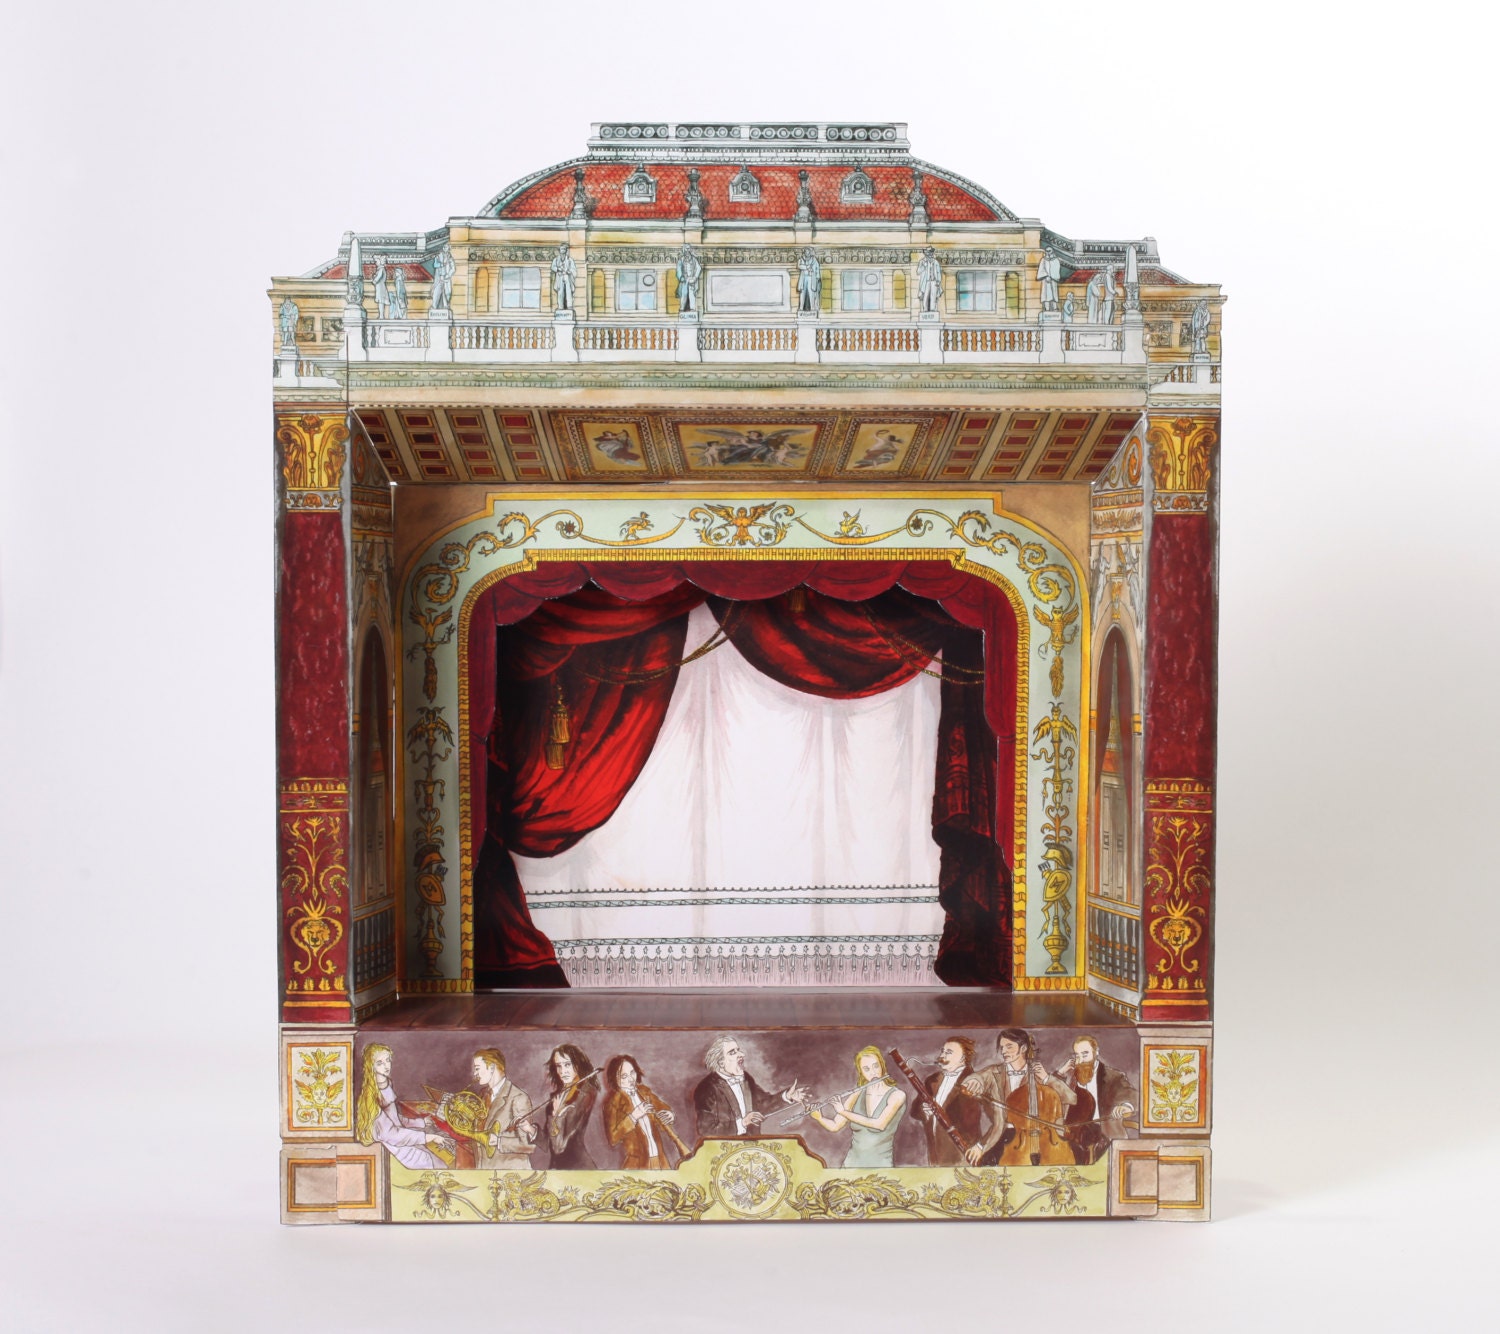 Toy theater - Wikipedia